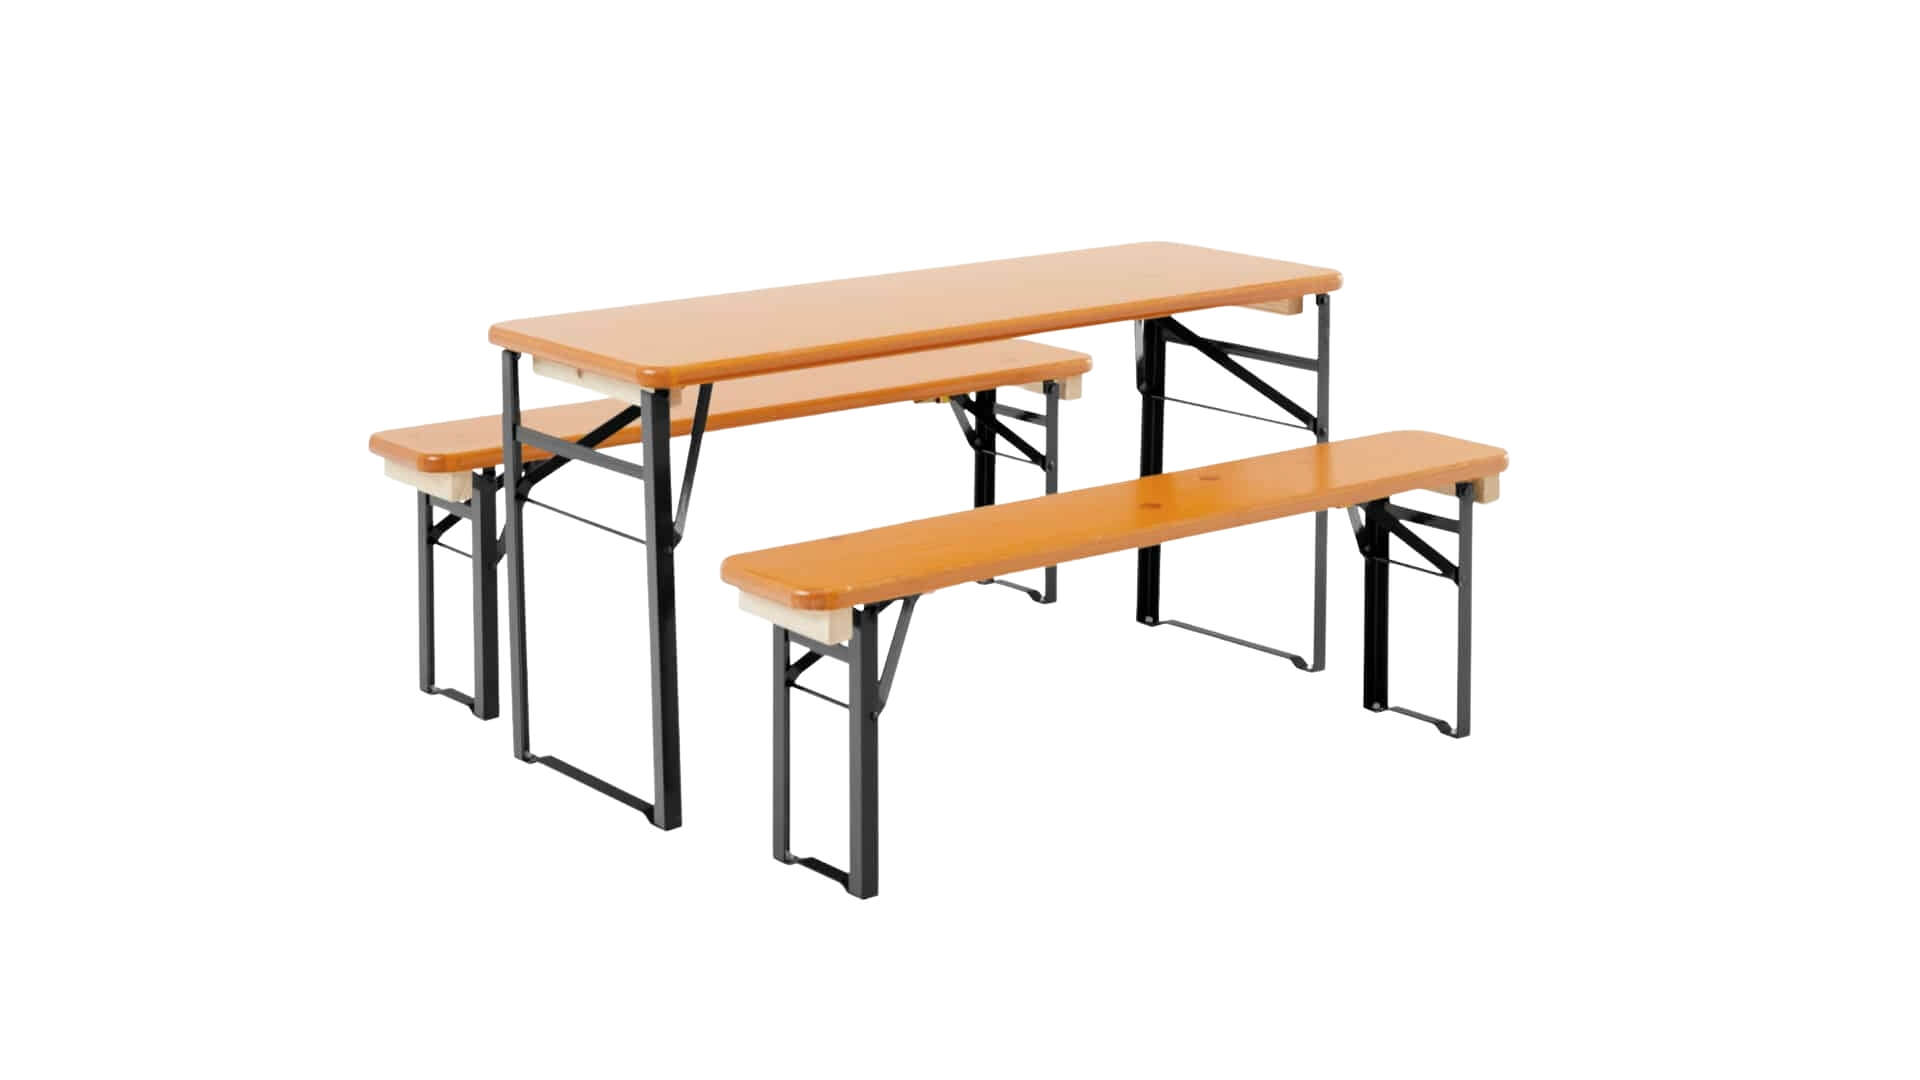 The small beer garden table sets Bambini in the color pine.